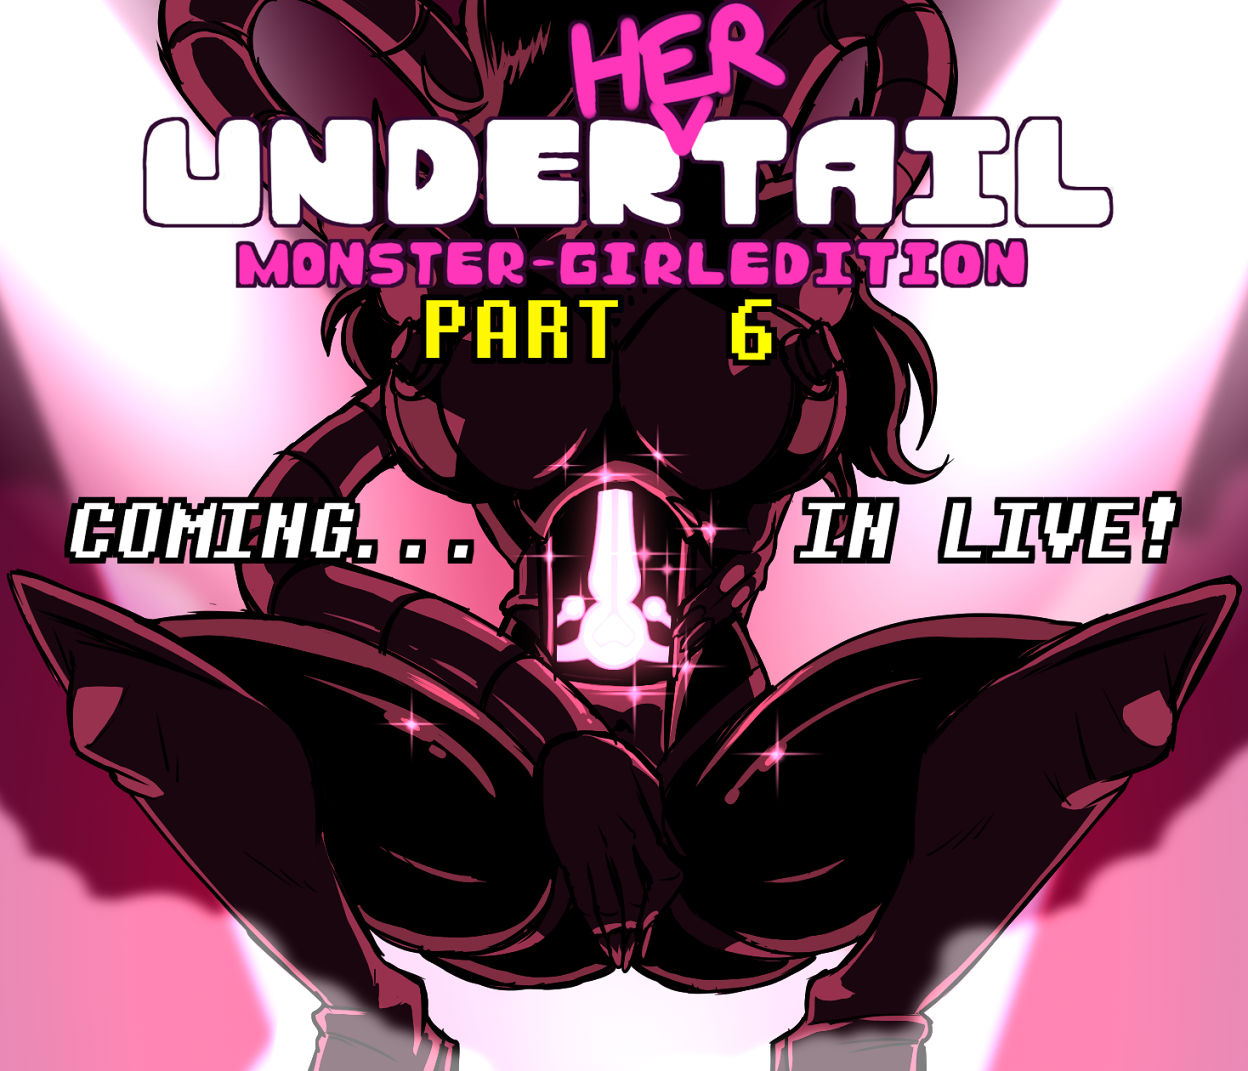 Underhertail monster girledition 6 porn comic picture 1